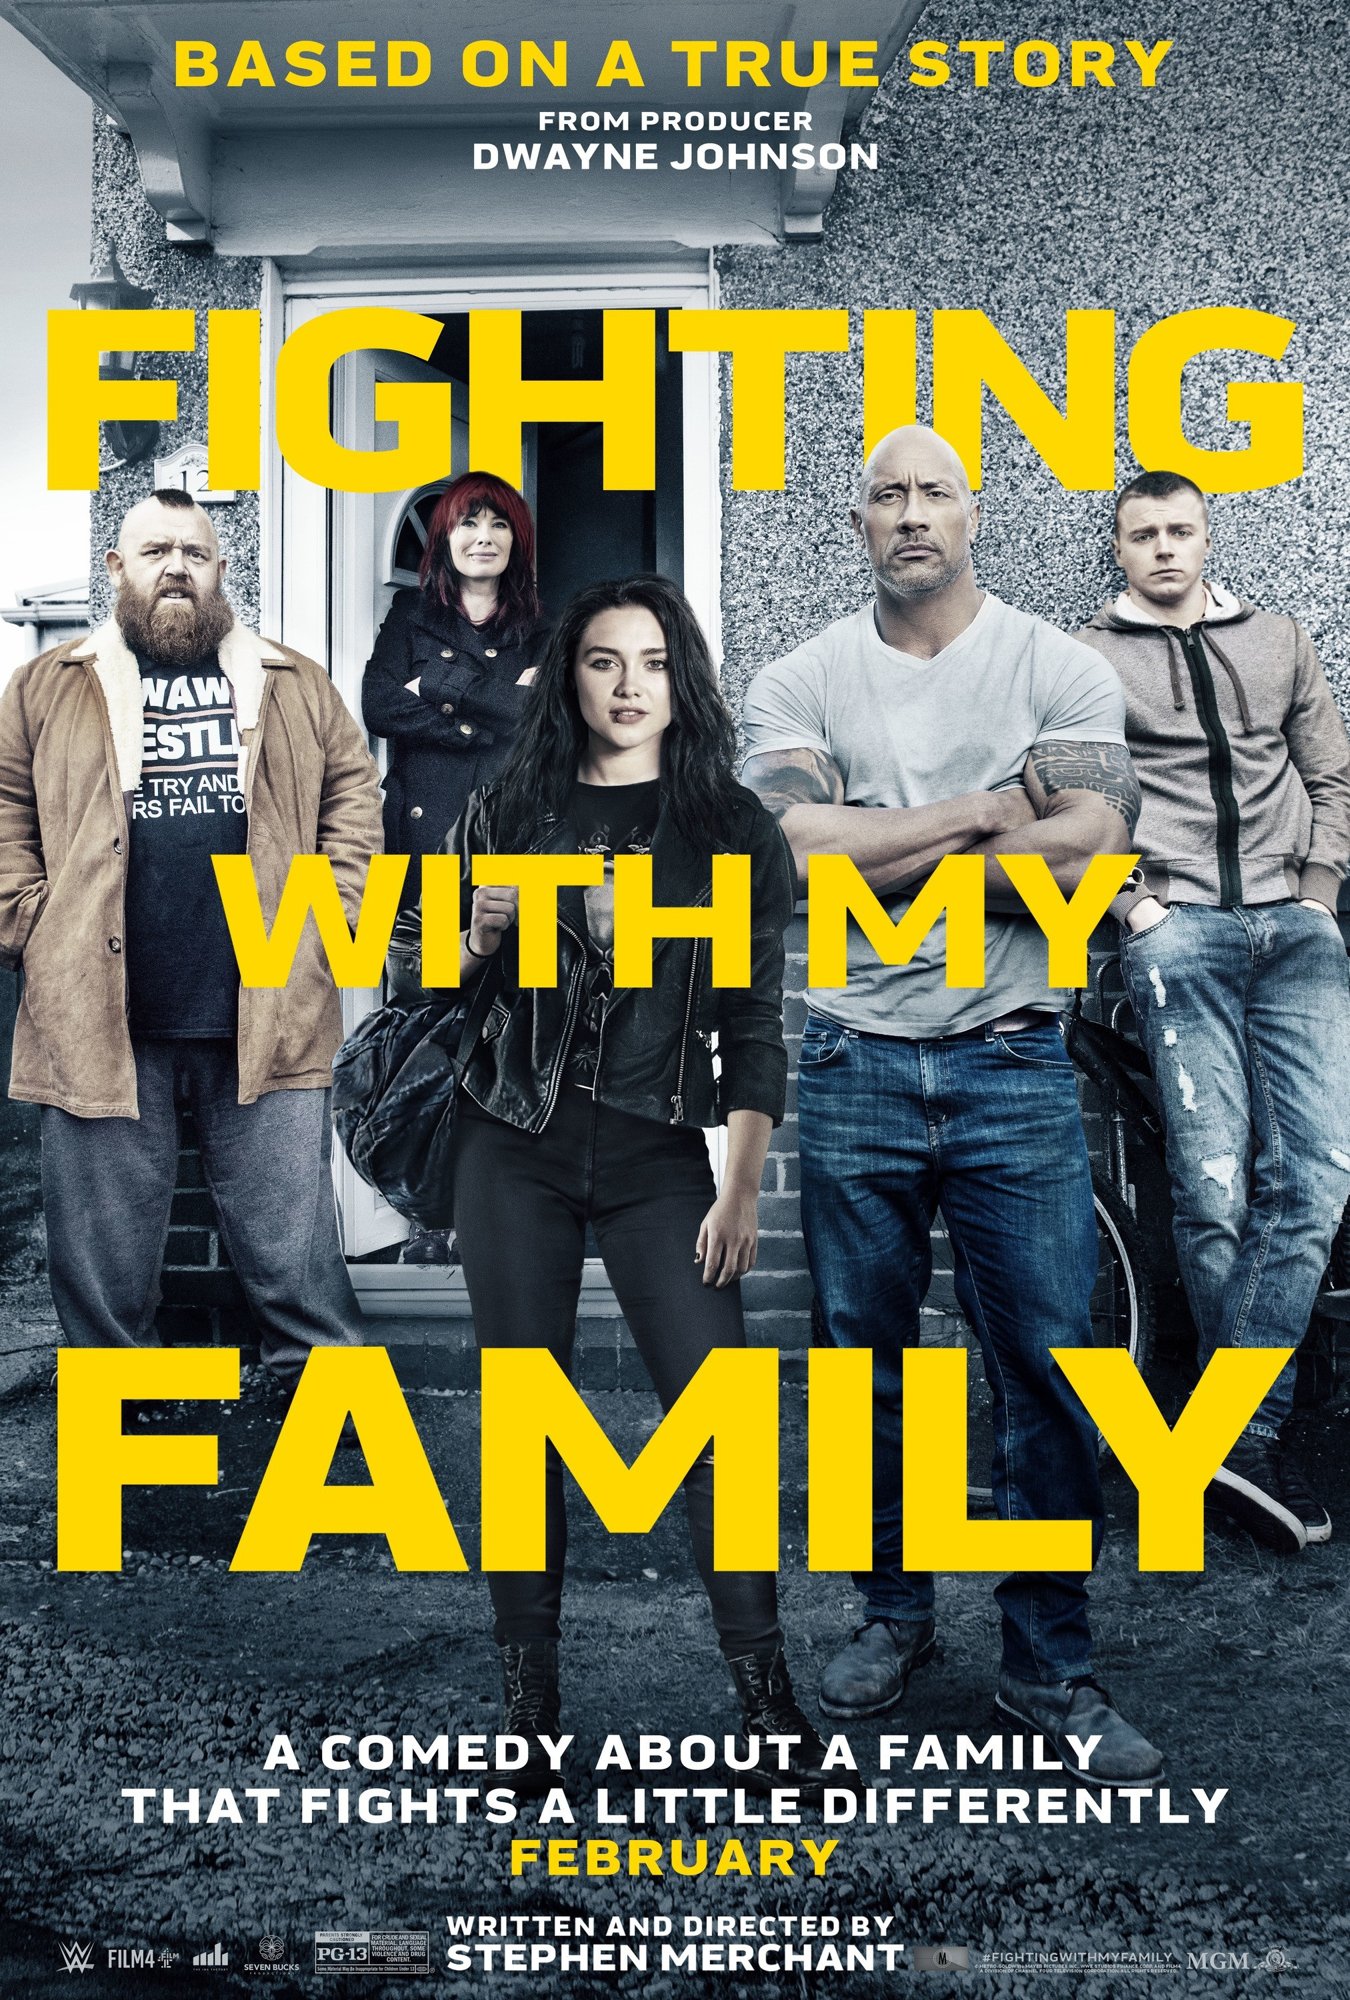 Poster of MGM's Fighting with My Family (2019)